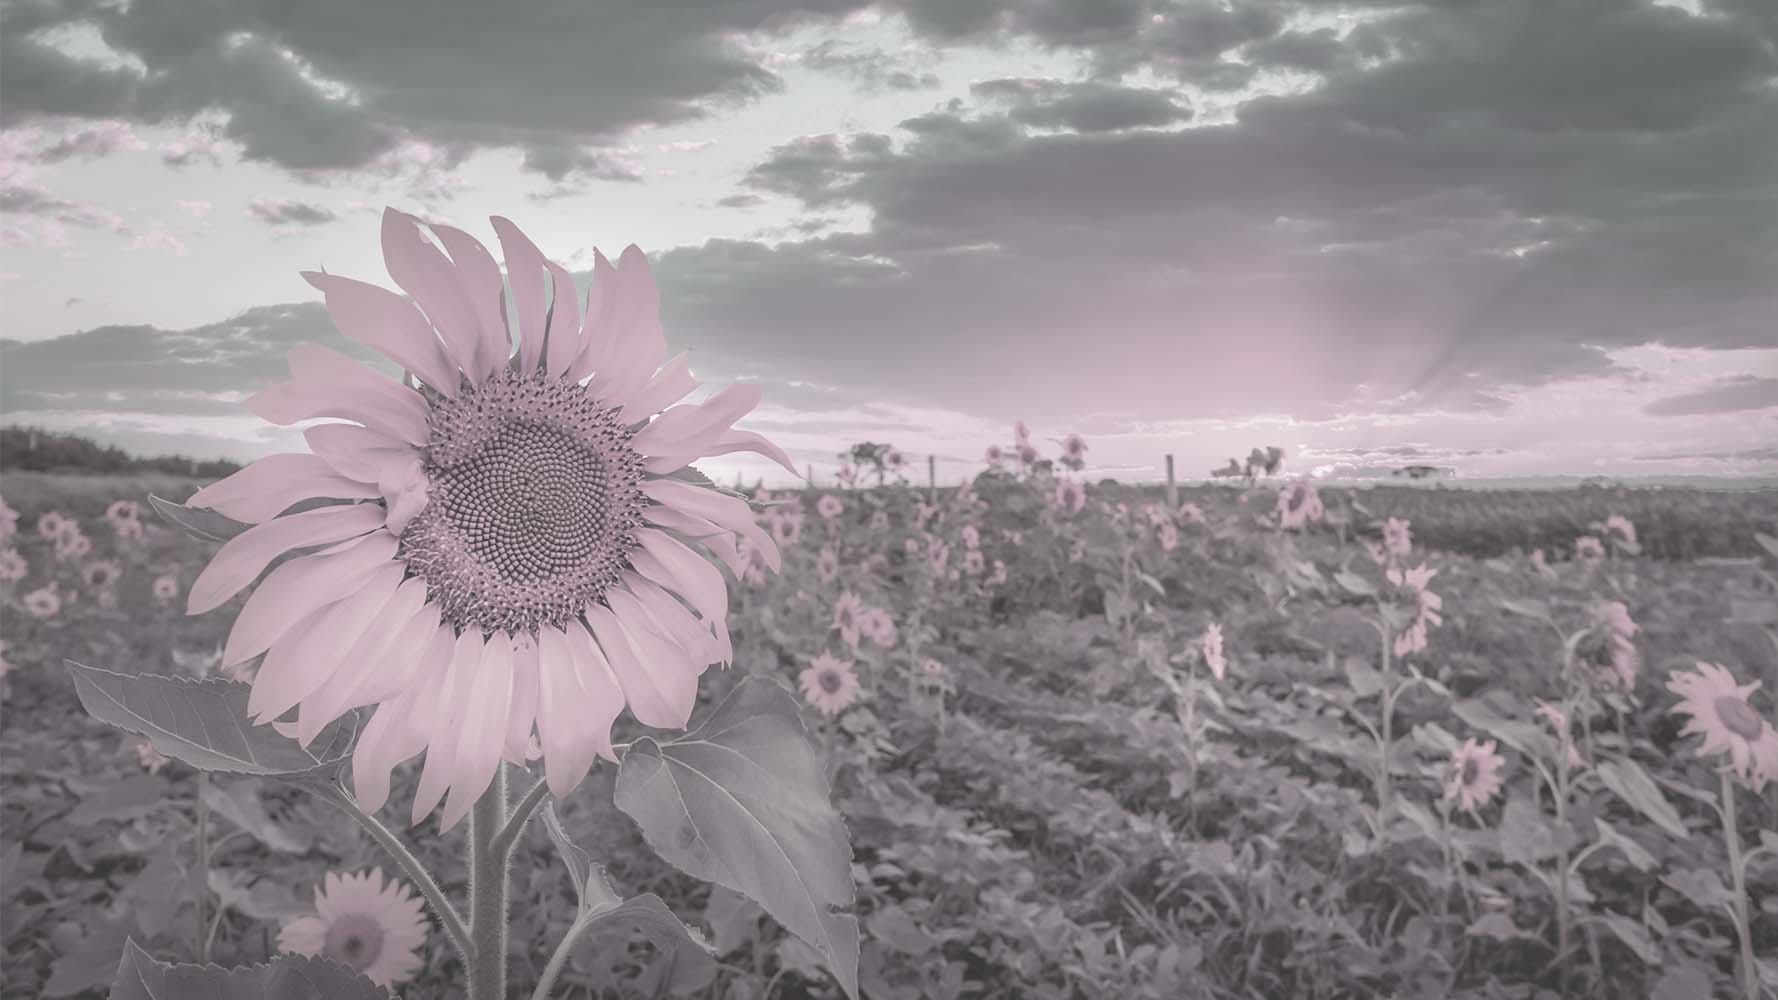 View of a sunflower field which appears black and white to indicate what a person with CVD might experience